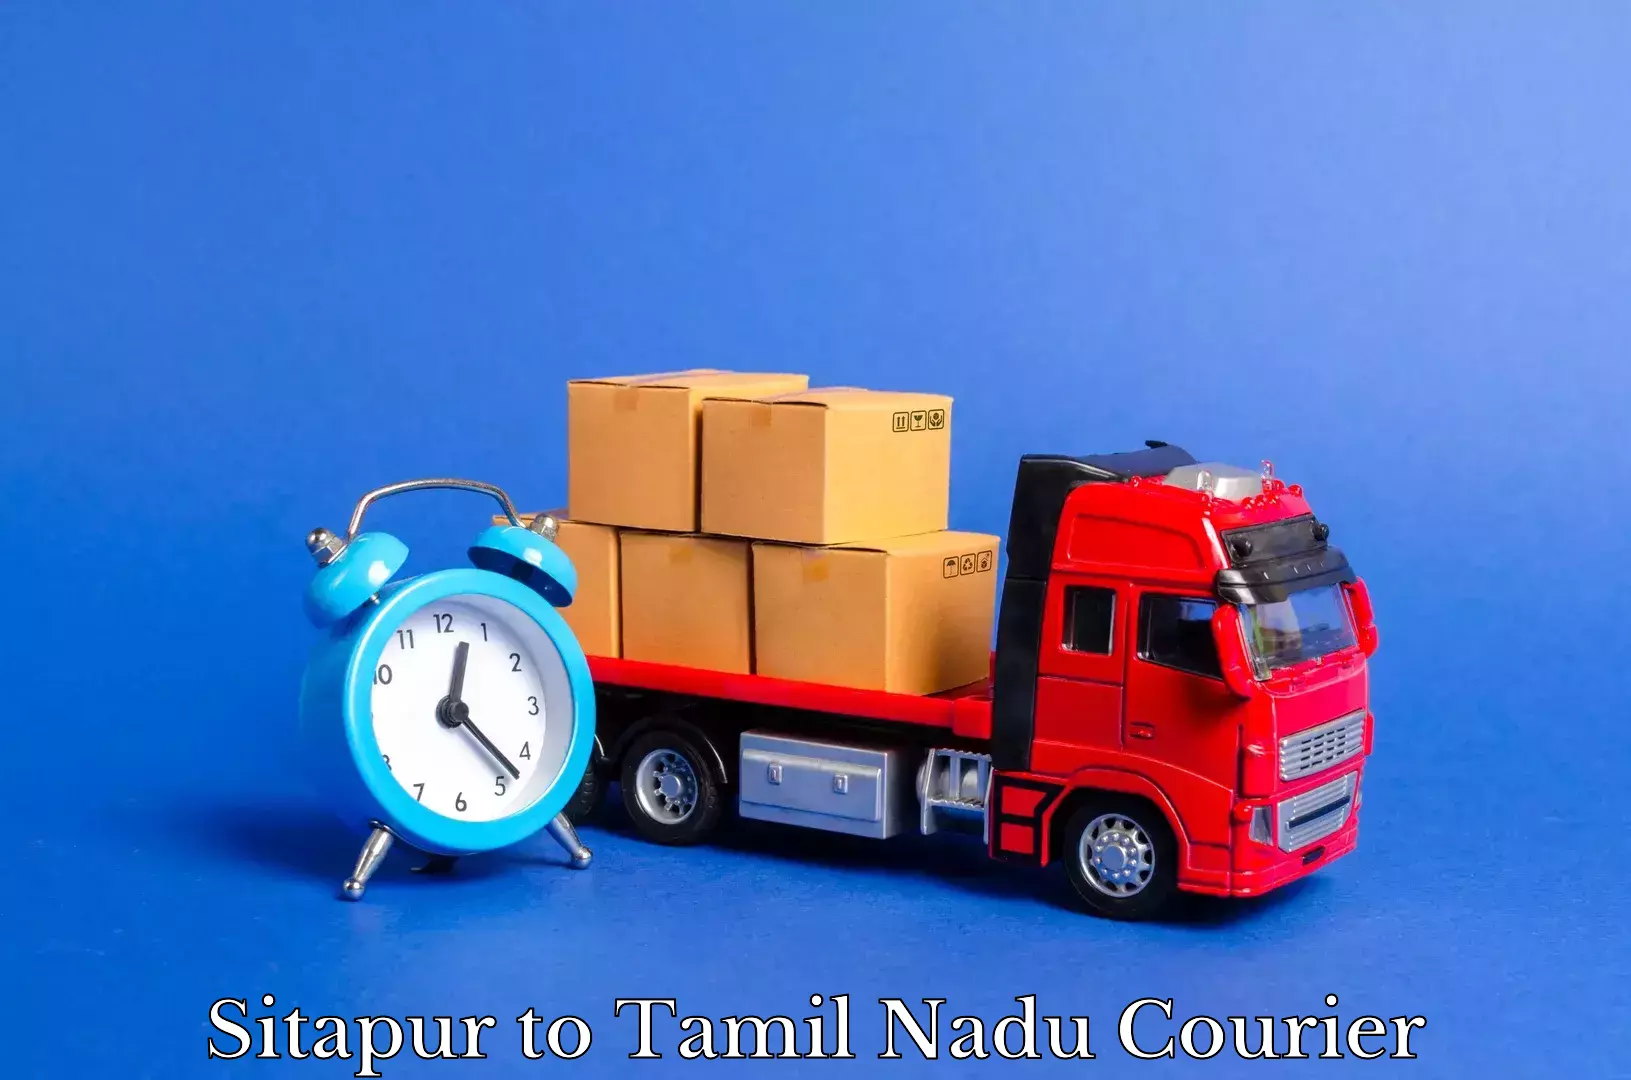 Furniture relocation experts Sitapur to Tamil Nadu